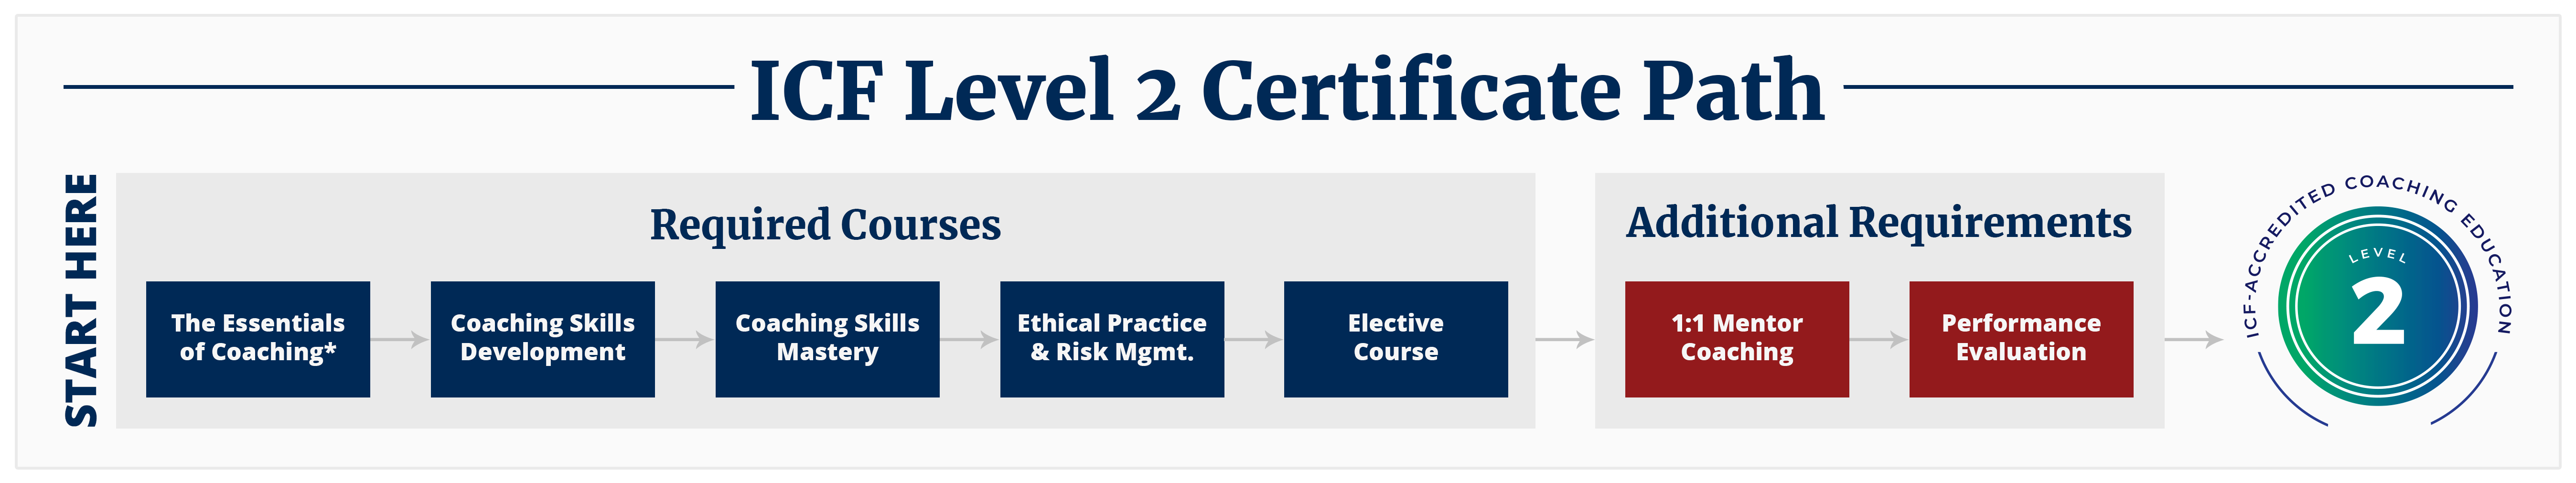 ICF Level 2 Certificate Path